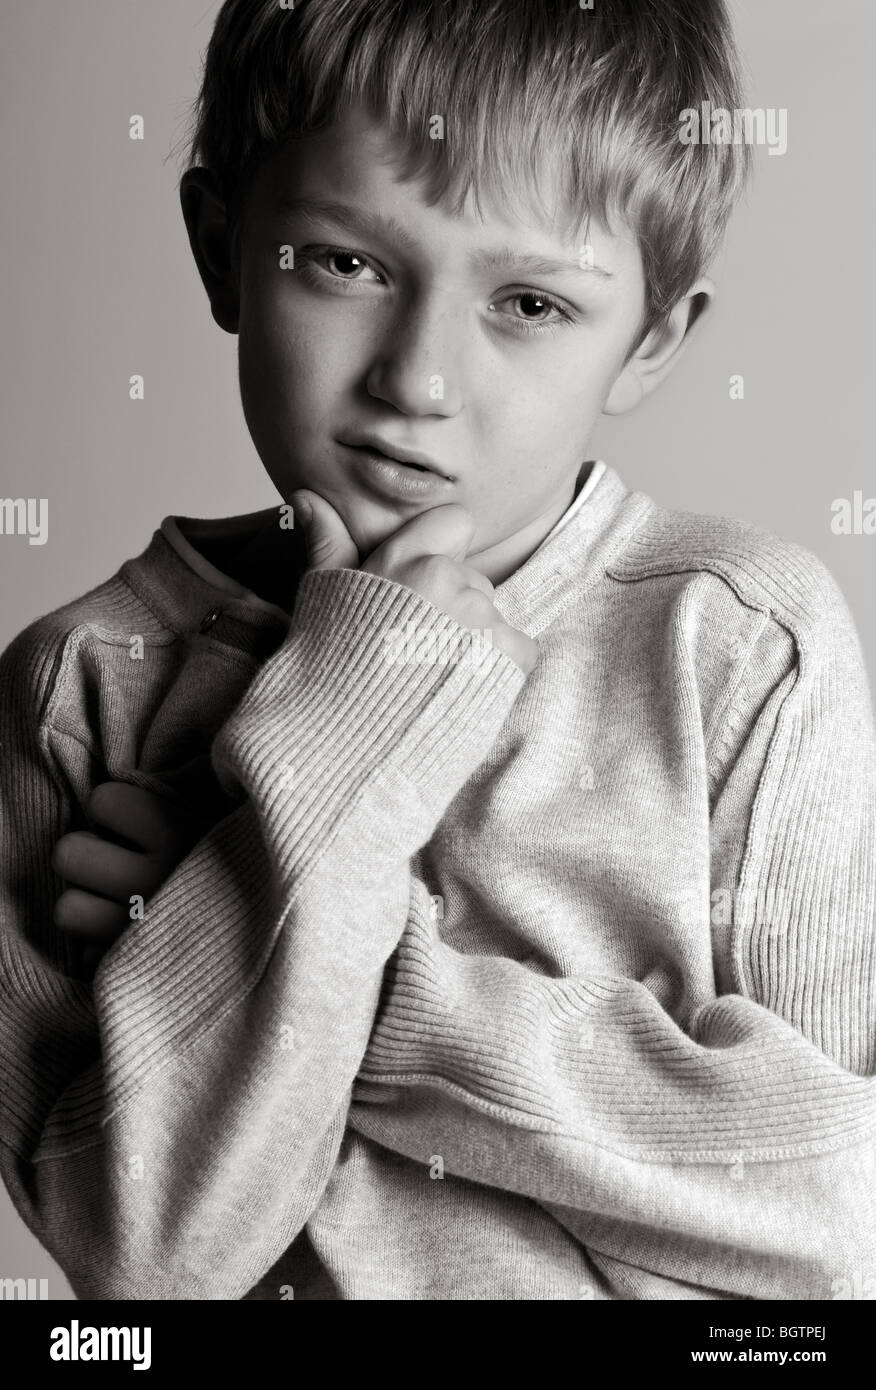 Black And White Shot Of A Cool Kid Stock Photo Alamy